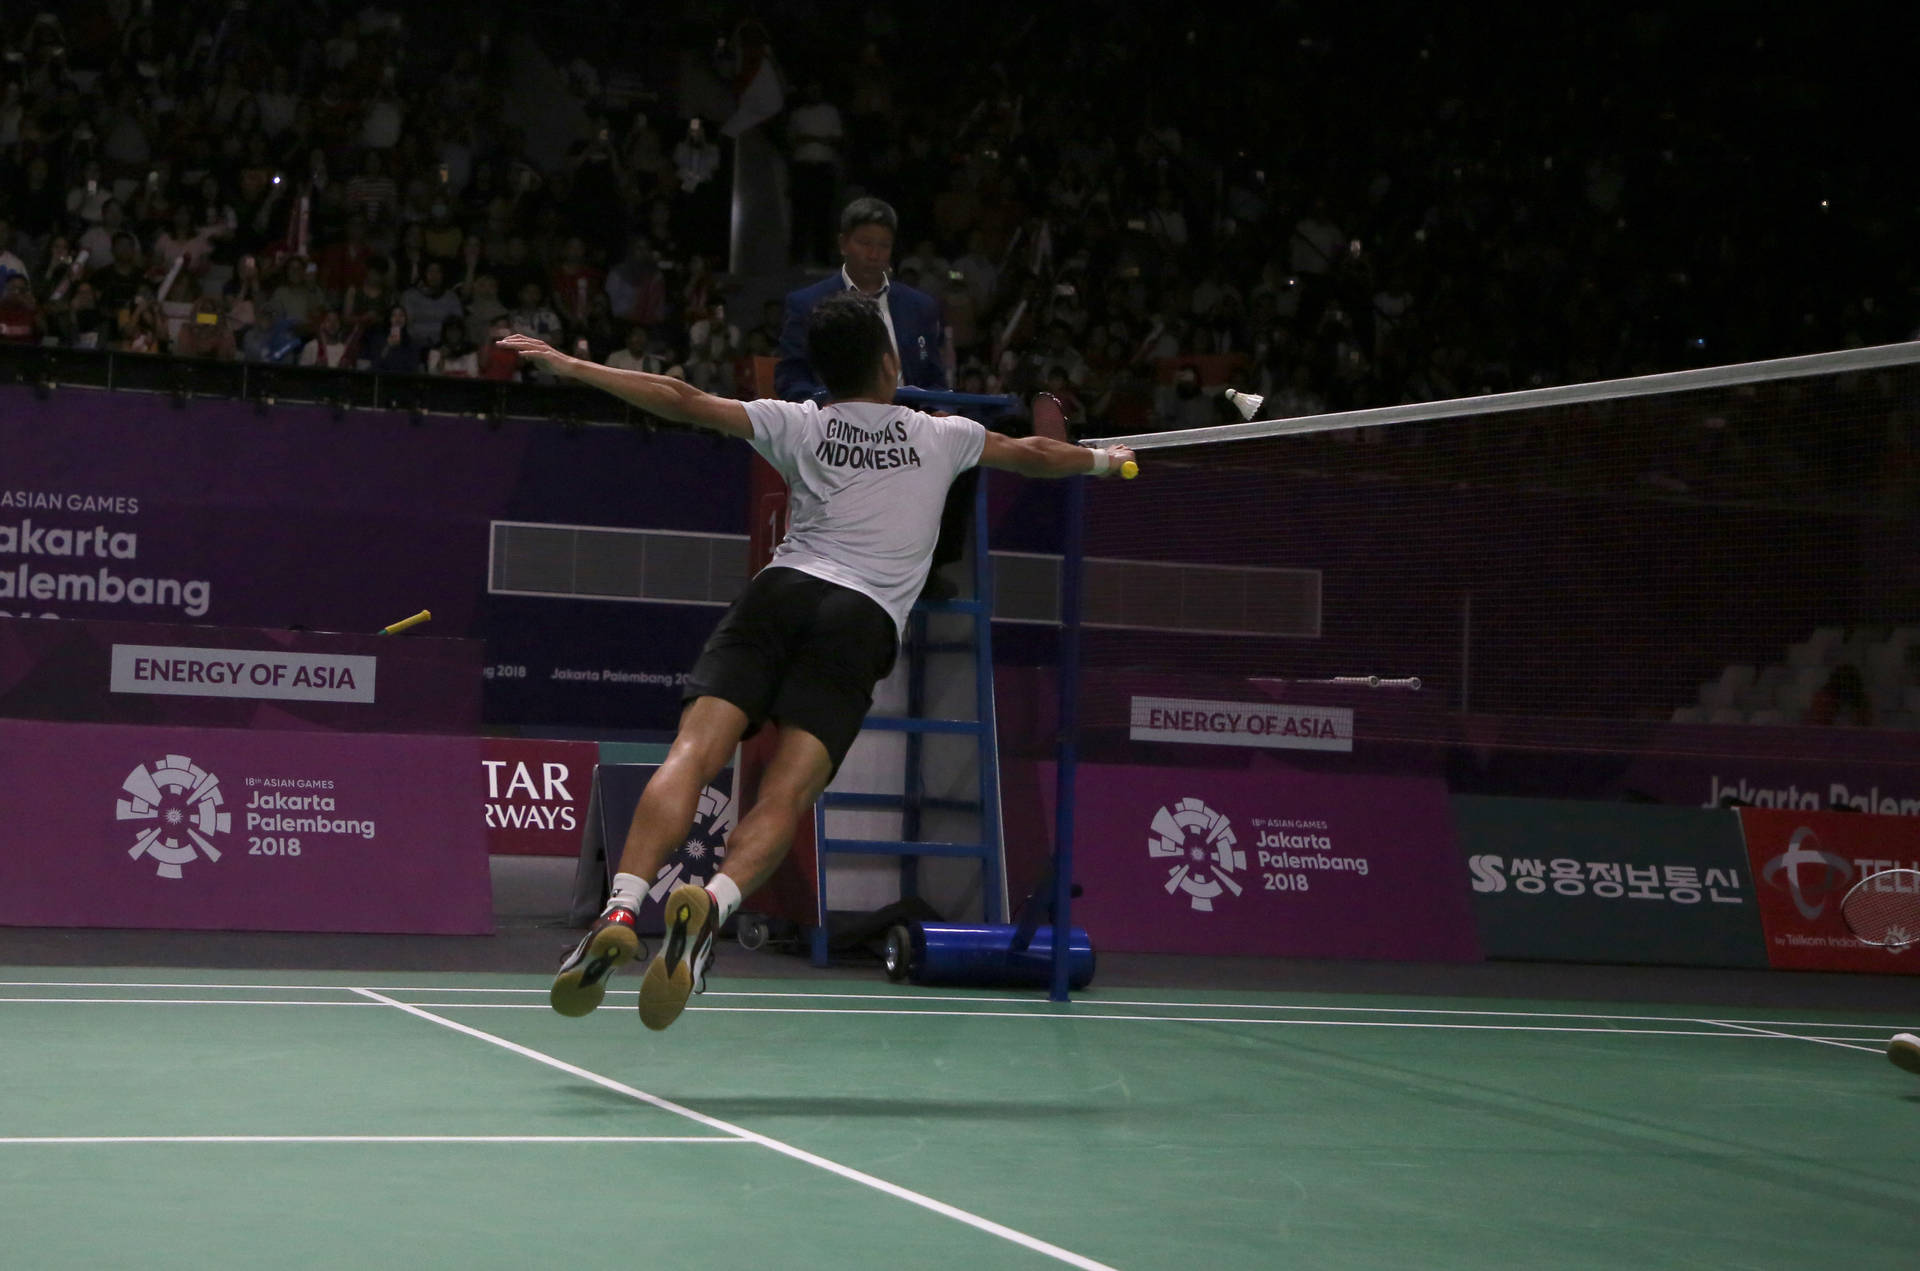 Badminton 4275X2831 Wallpaper and Background Image